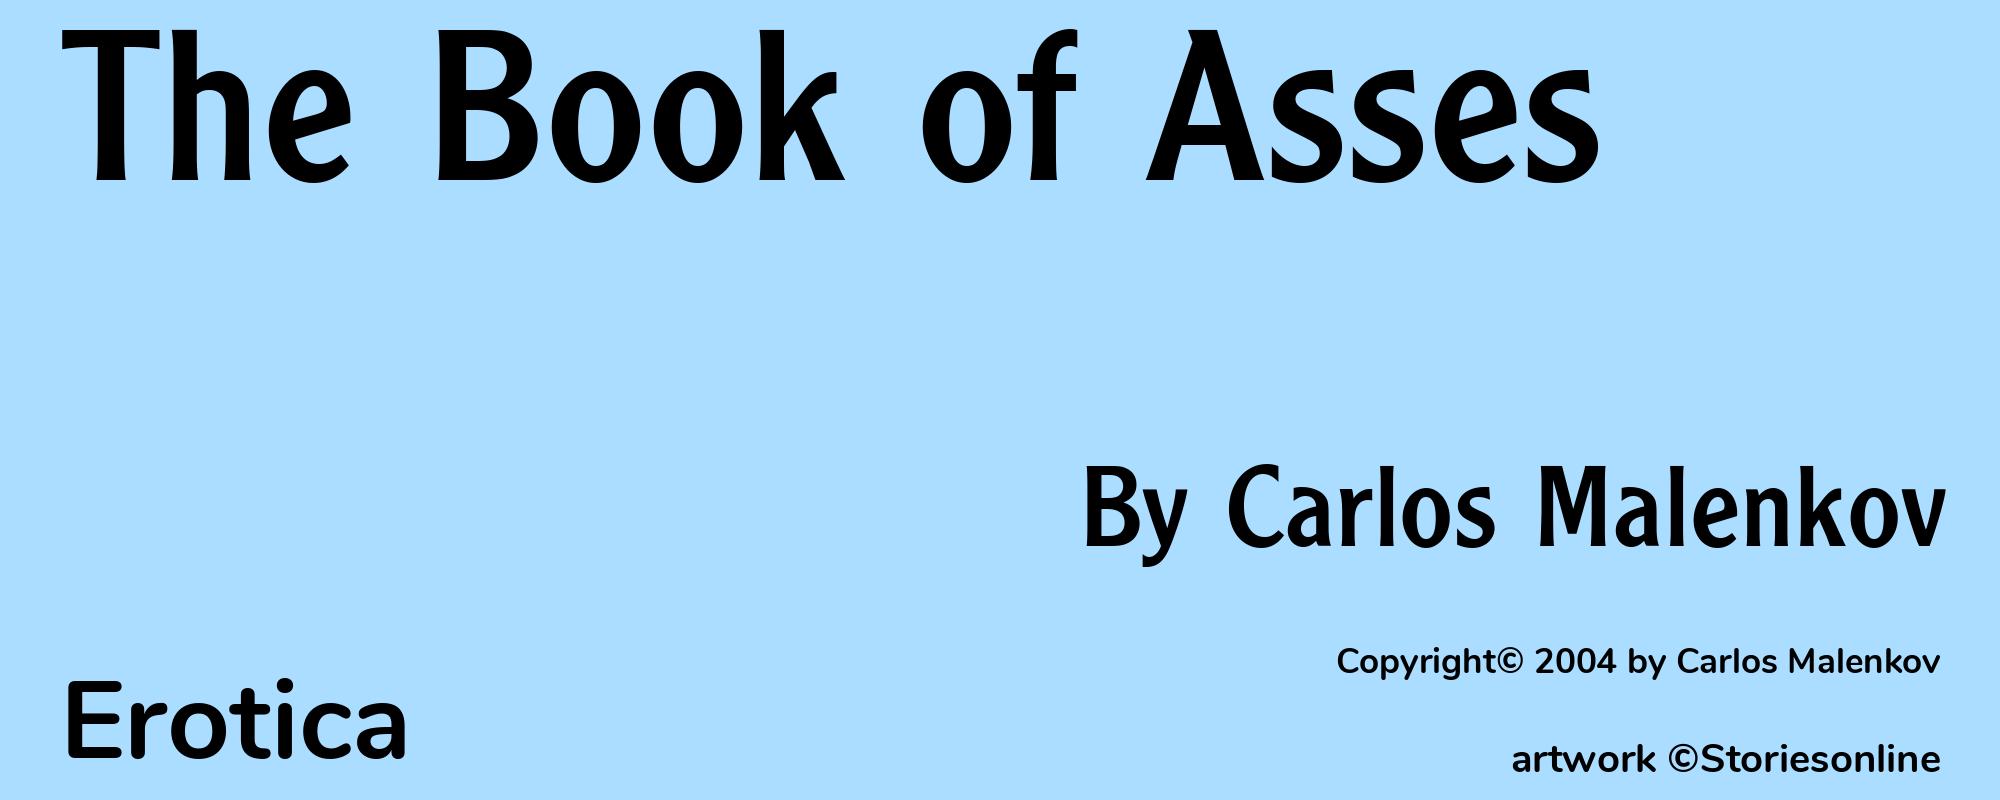 The Book of Asses - Cover